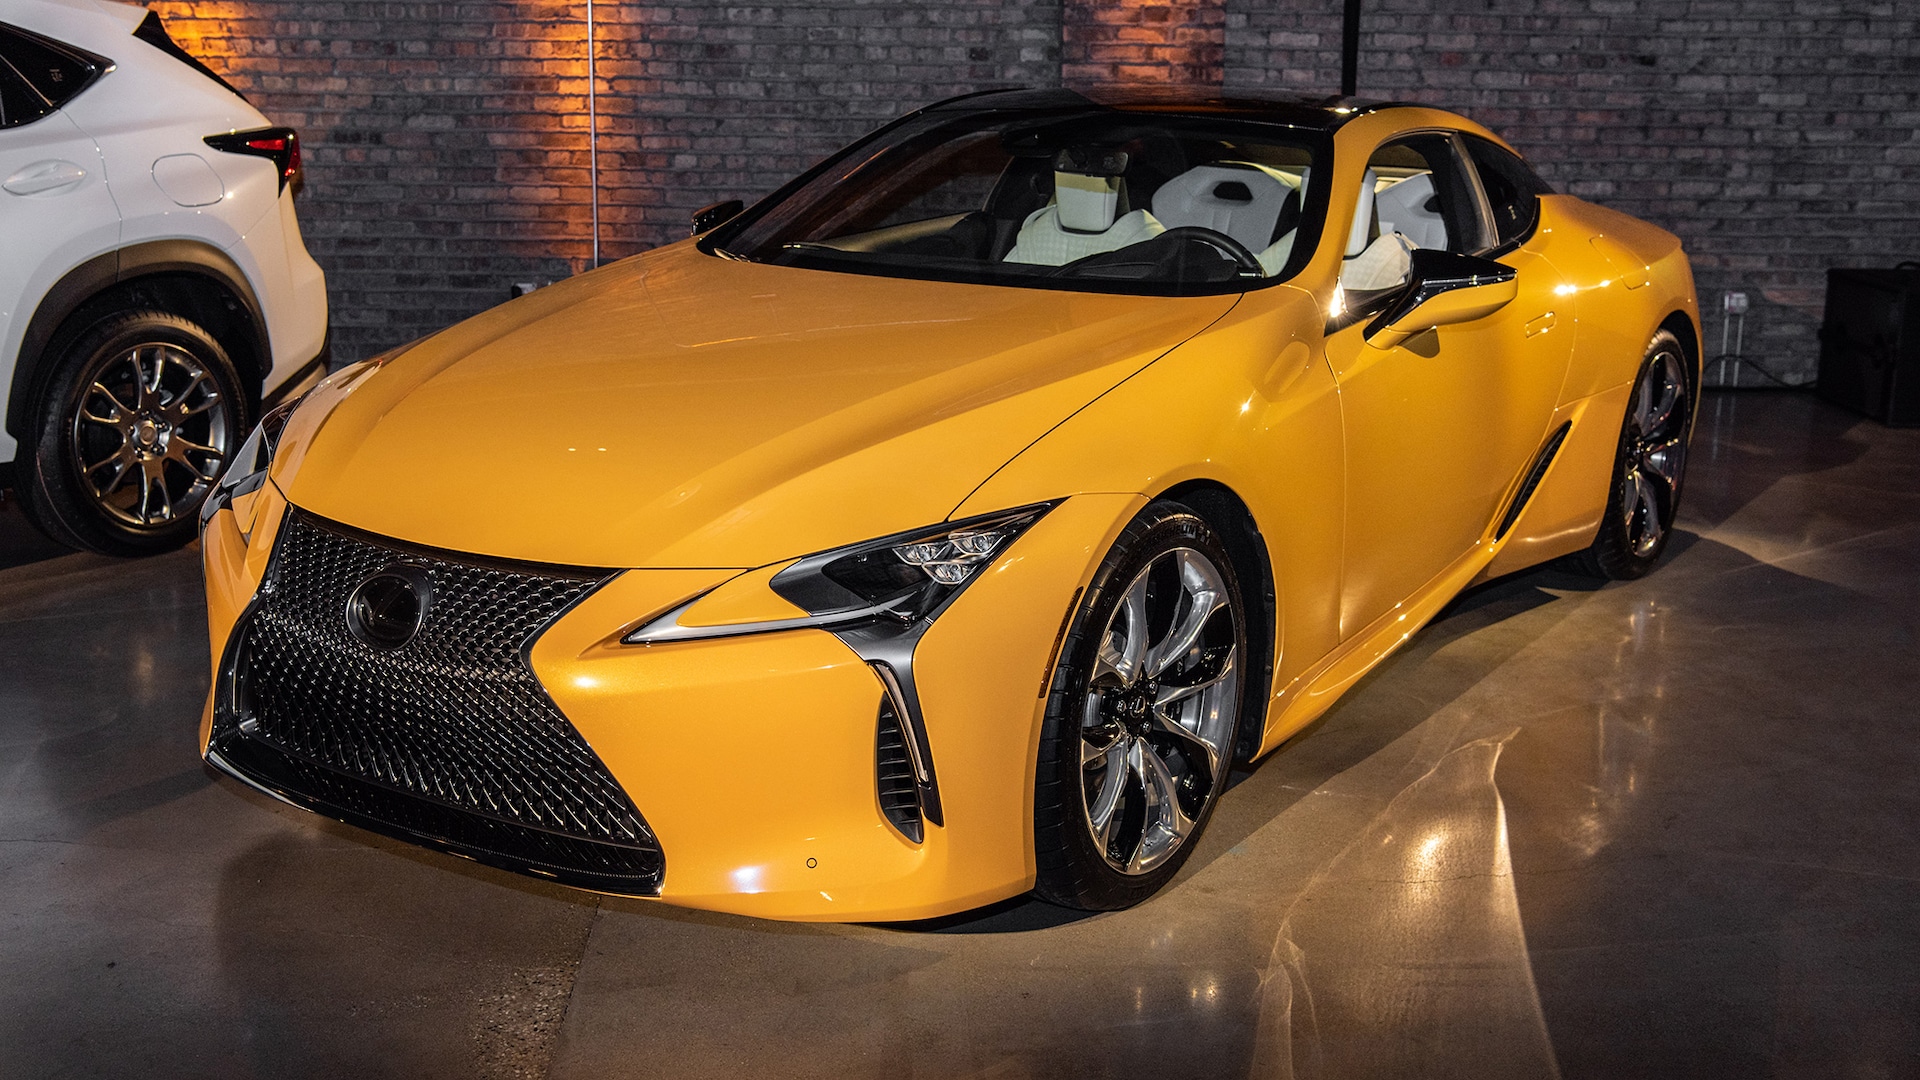 New Lexus LC500 Model Is Extremely Limited and Extremely Yellow